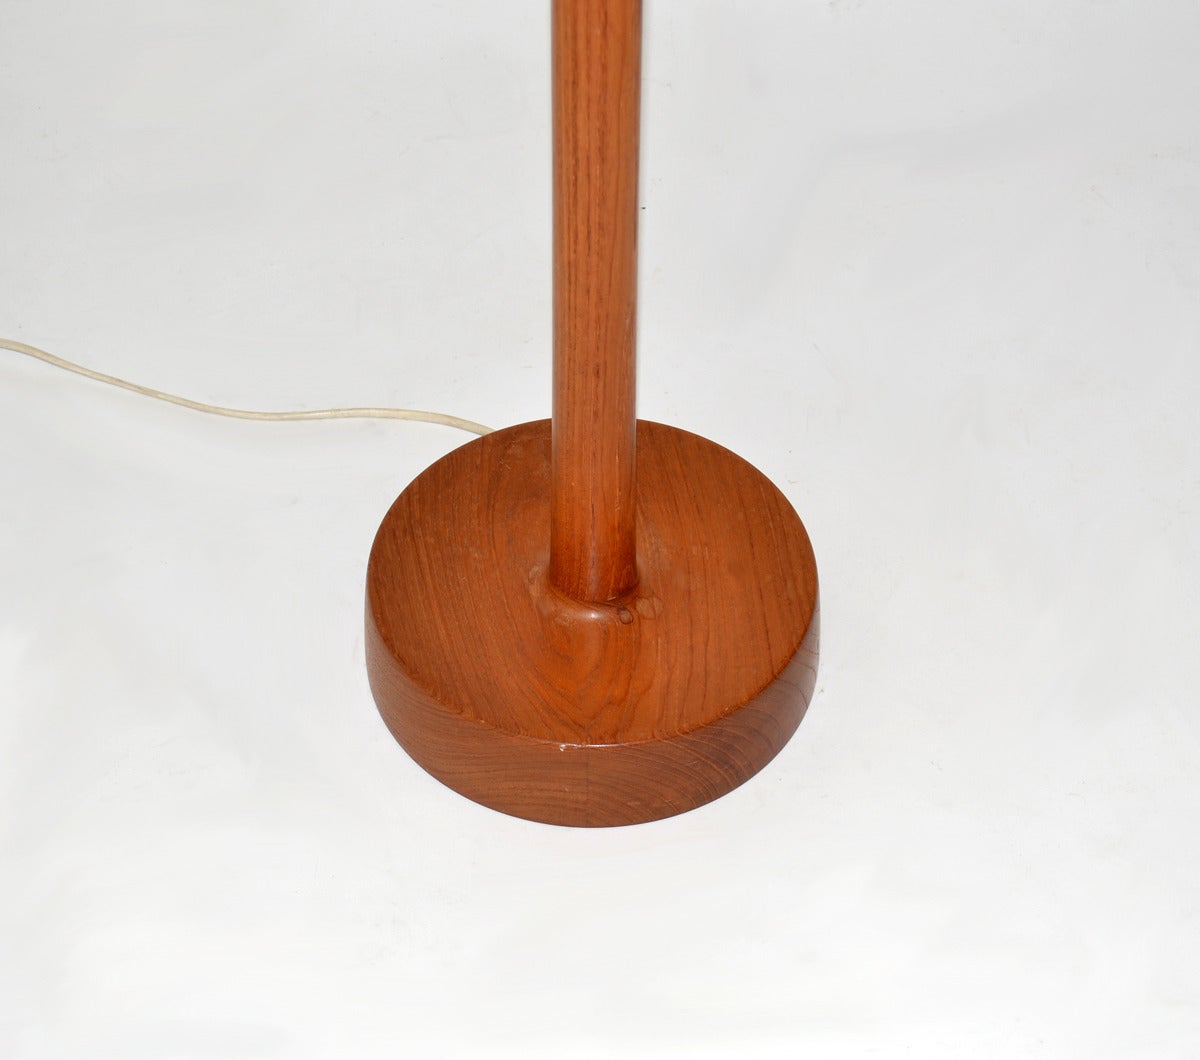 Masculine floor lamp by O¨sten & Uno Kristiansson for Luxus, Sweden - Teak frame with black leather shade. Labeled. Recently re wired with floor step switch on black cord. Please see detail of new bulb receptacle.